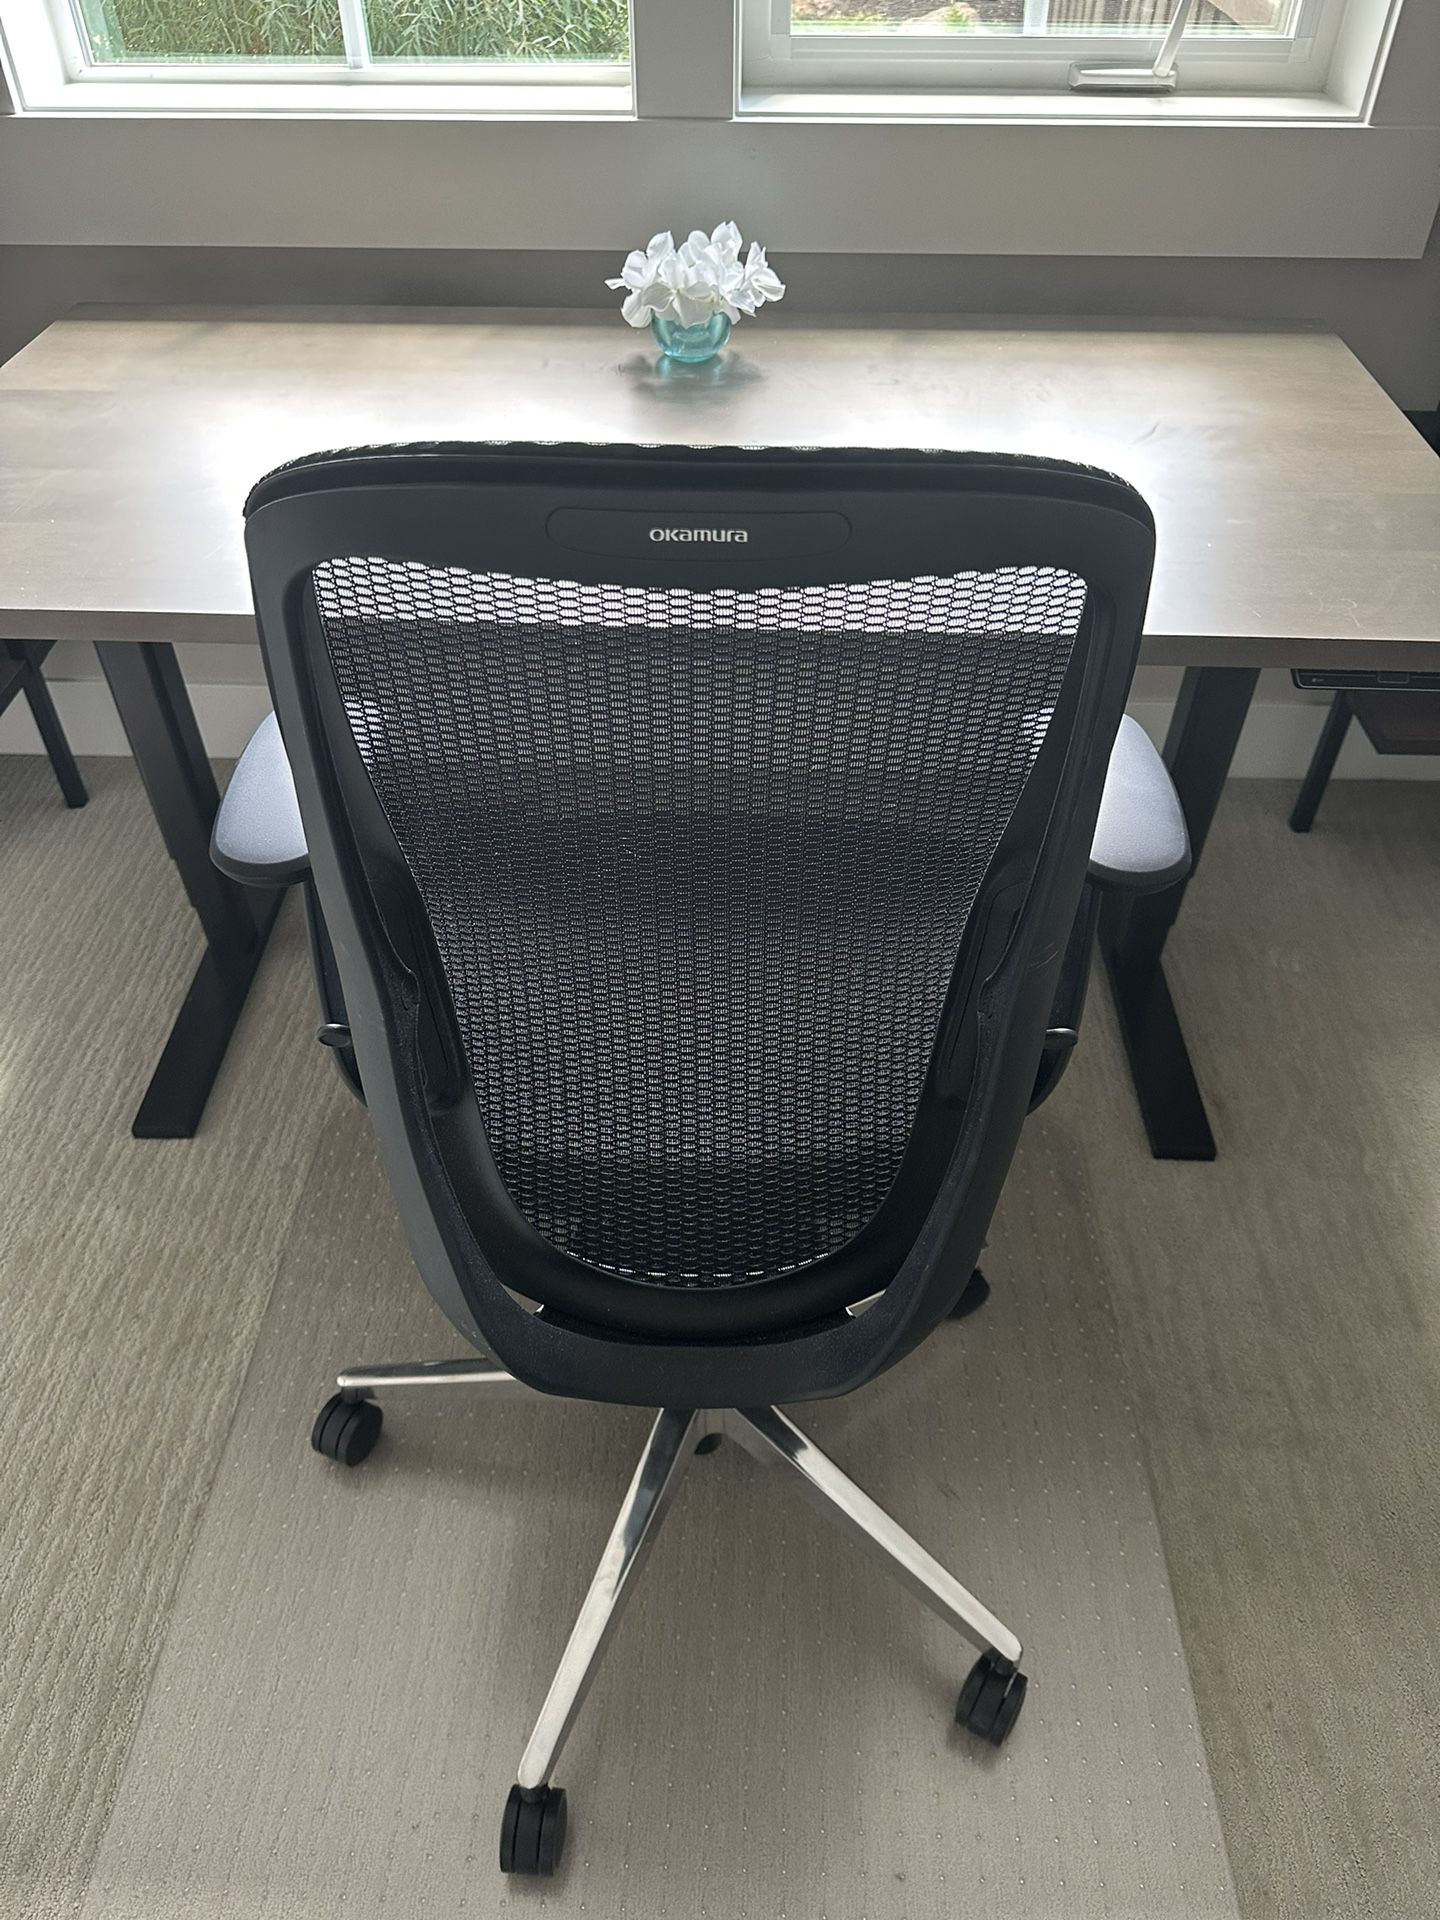 Desk - Electric adjustable height. Purchased from Room and Board 16 months ago and no longer need because we moved . Also selling desk chair from Room